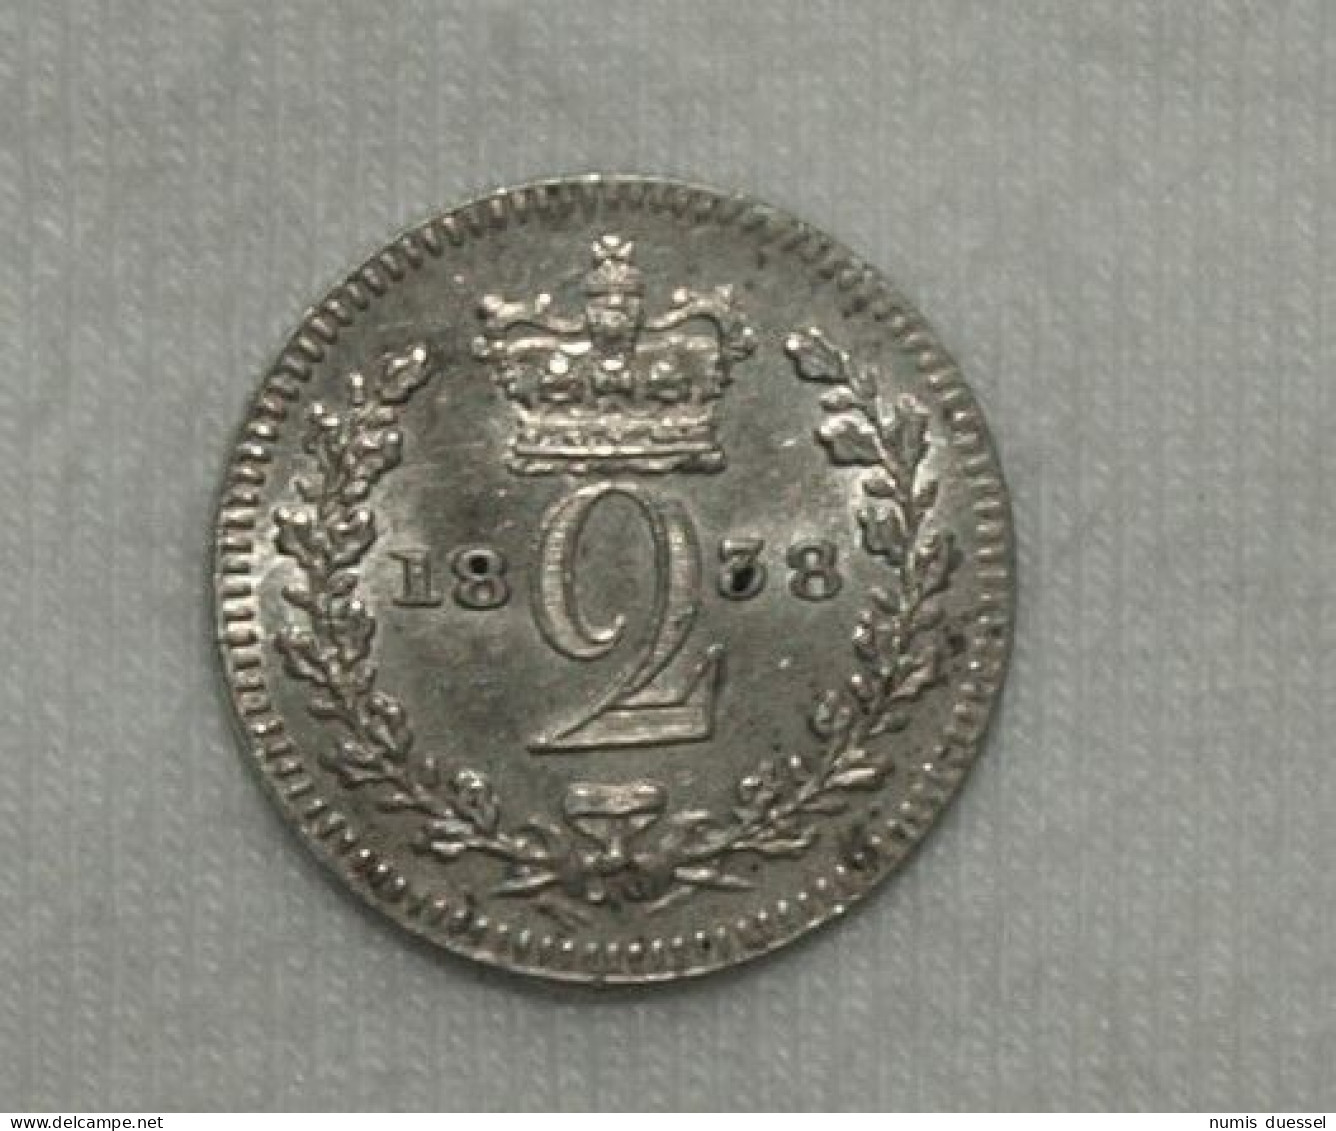 Silber/Silver Prooflike Maundy Großbritannien/Great Britain Victoria Young Head, 1838, 2 Pence UNC - Maundy Sets & Gedenkmünzen